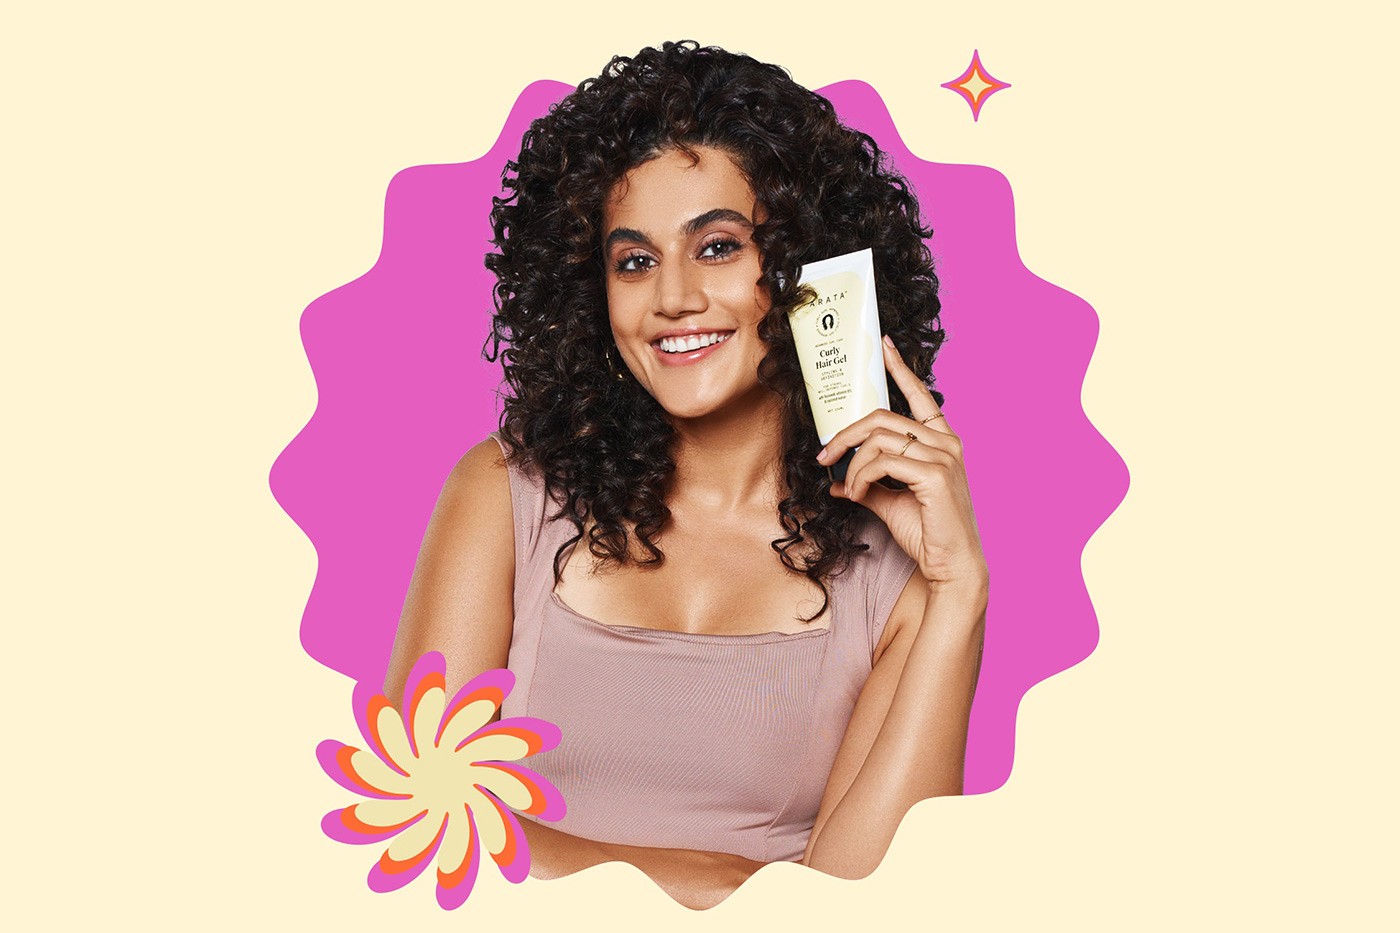 Tapsee Pannu becomes the new face of Arata’s curl care range